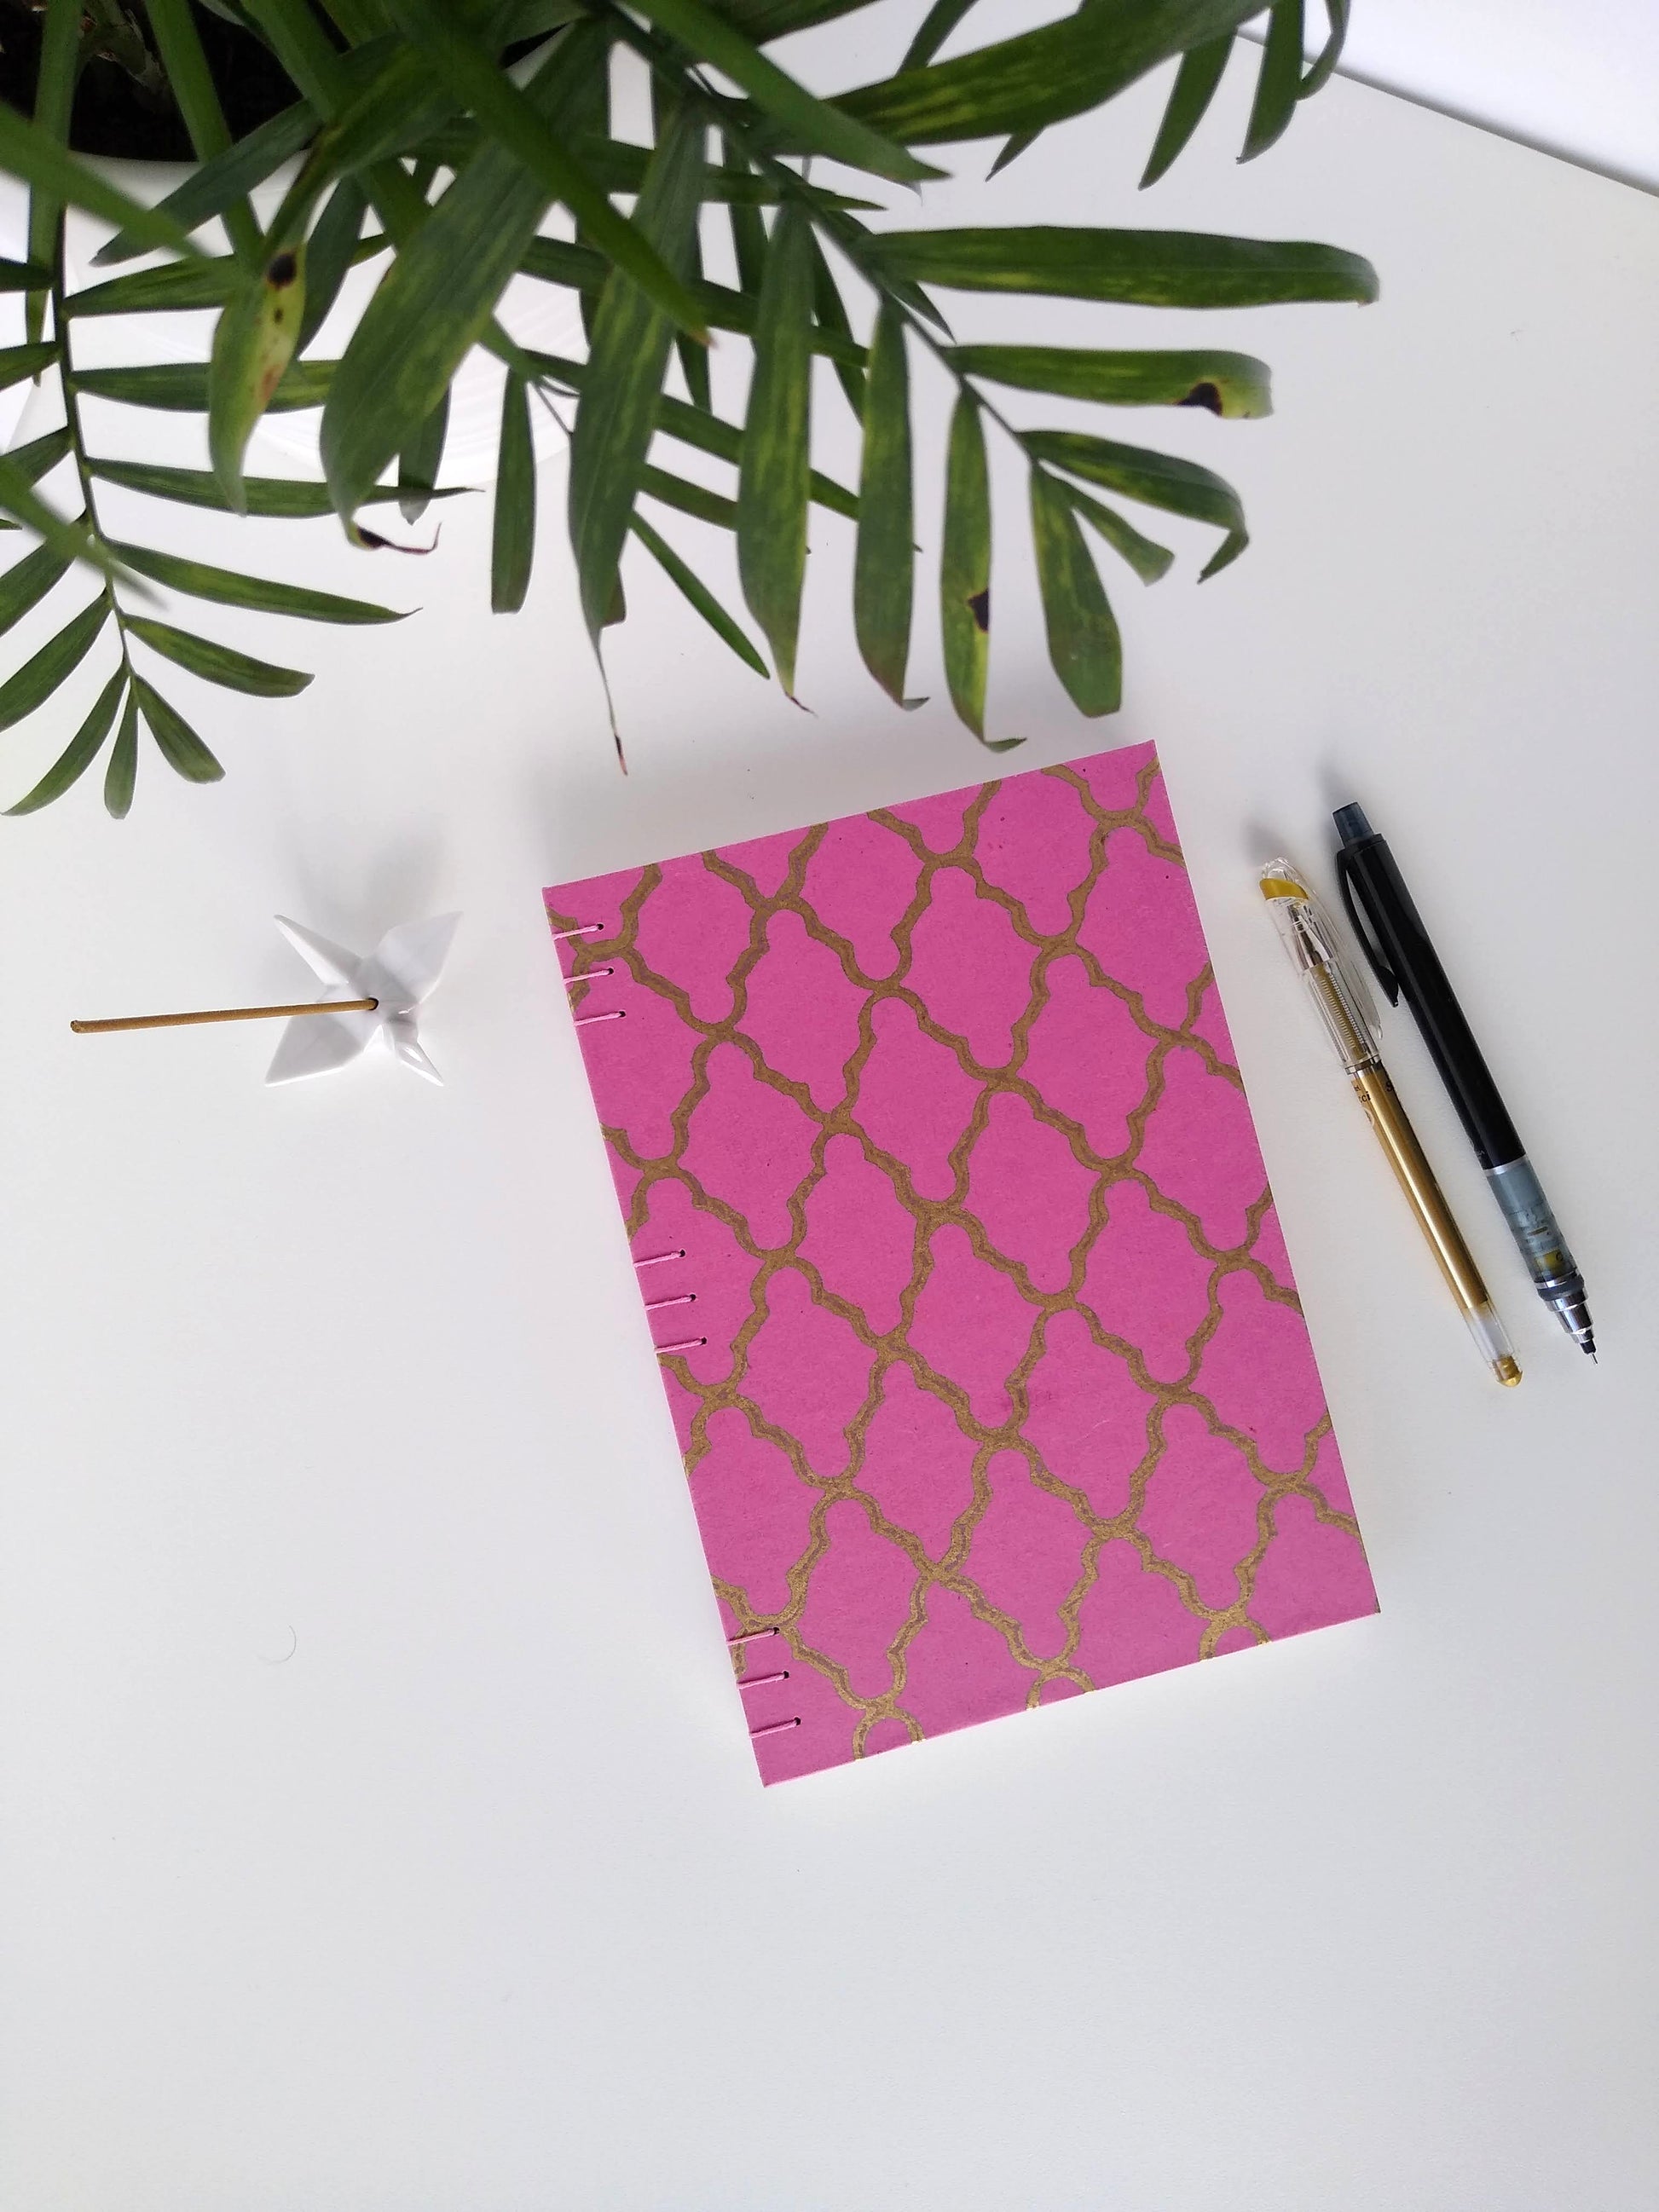 A handmade journal laying on a white desk beside a potted plant, a ceramic crane, a gold pen, and a black mechanical pencil. The cover of the journal is pink with a gold quatrefoill design across the front.